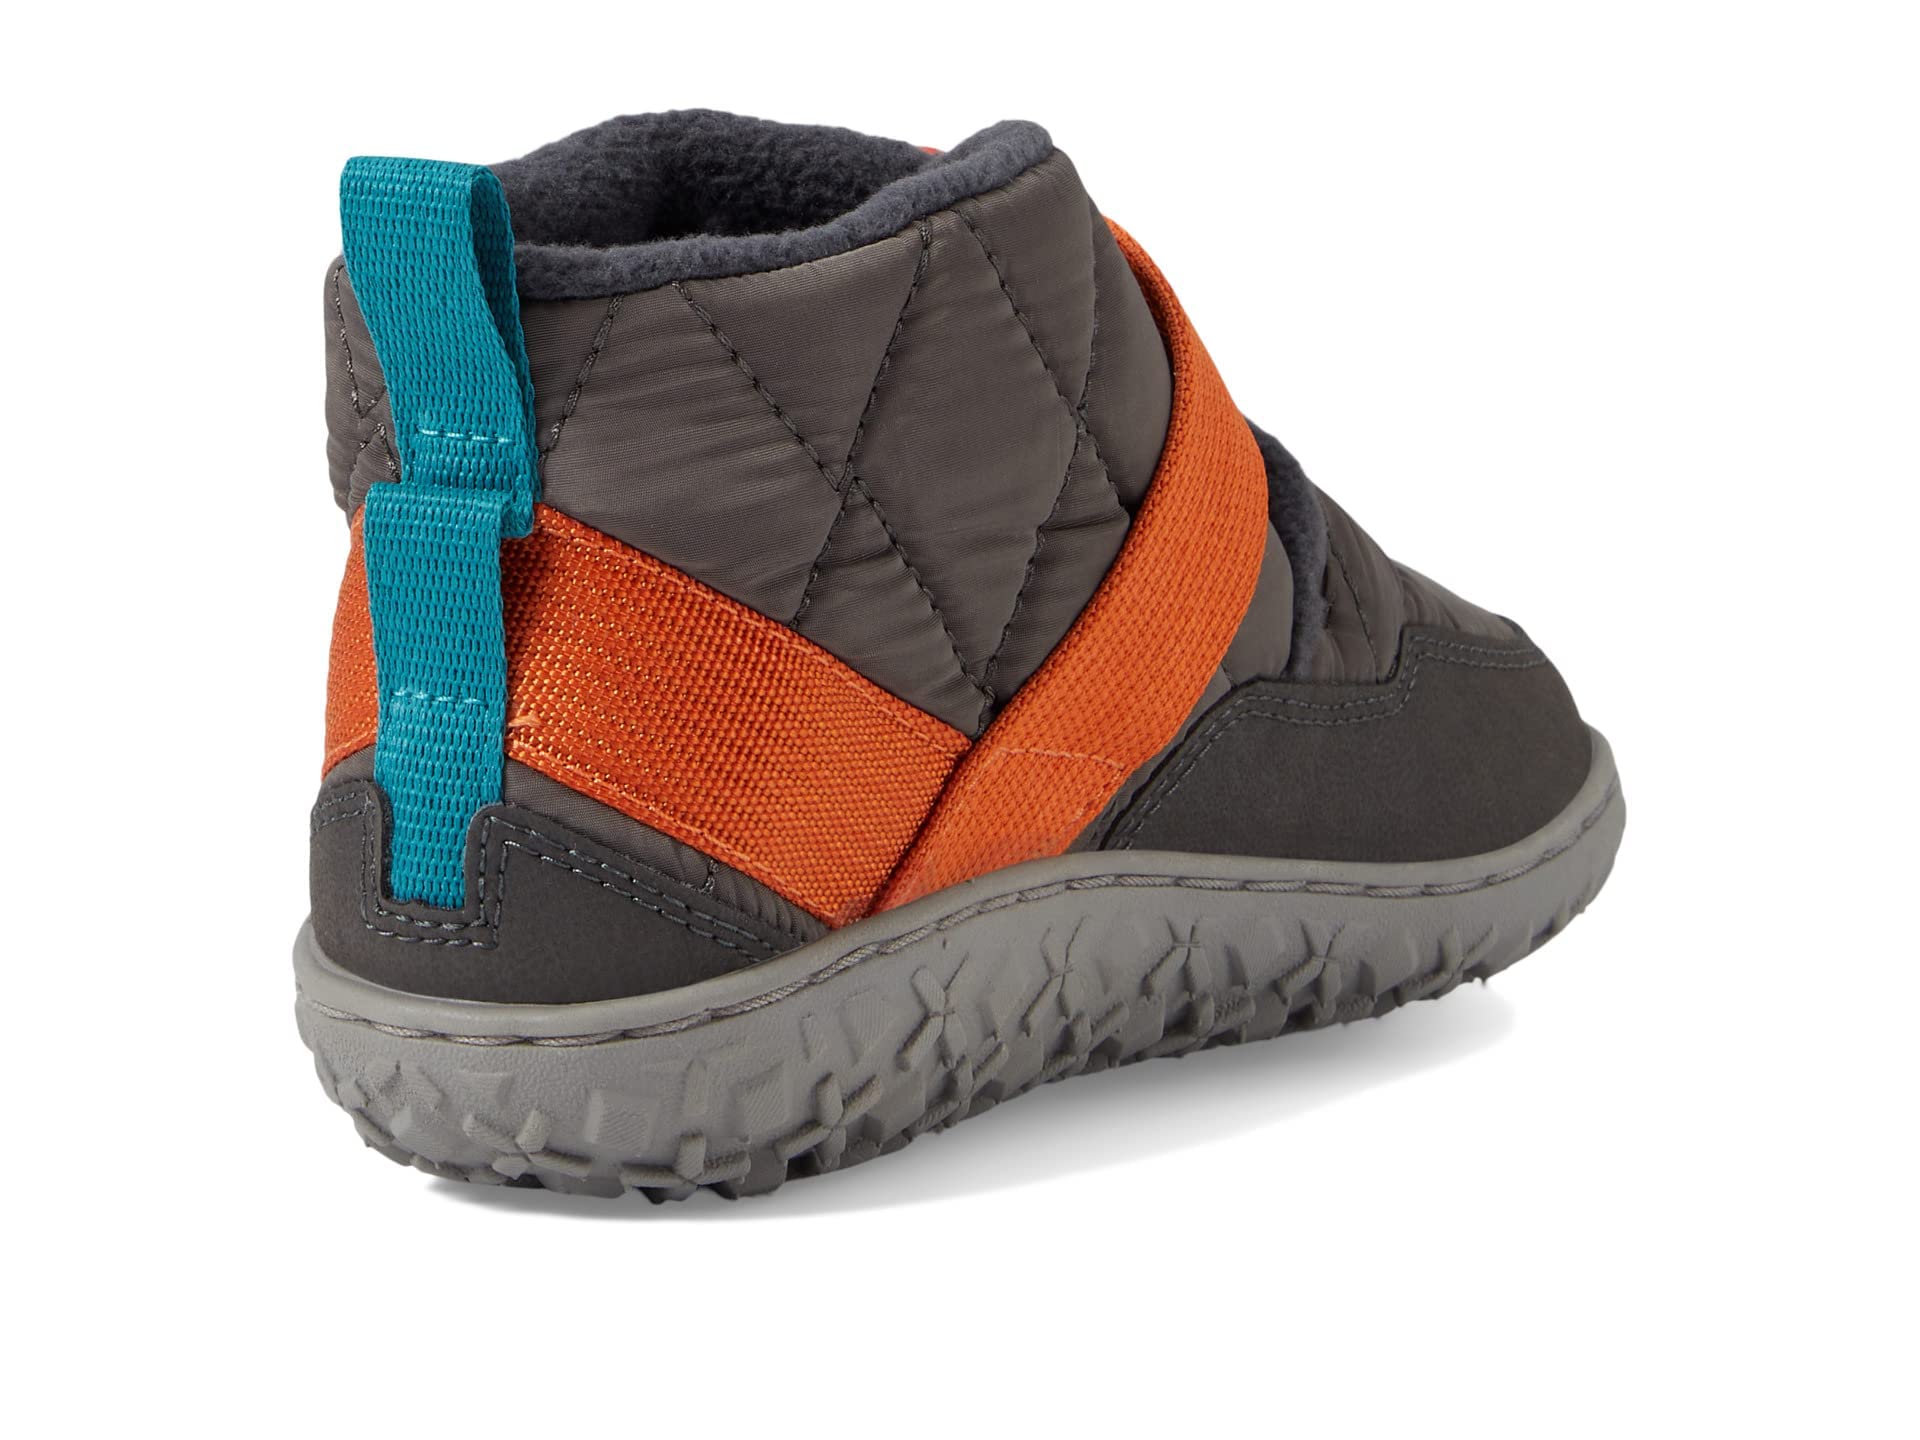 Chaco Unisex-Child Ramble Puff Kids Ankle Boot